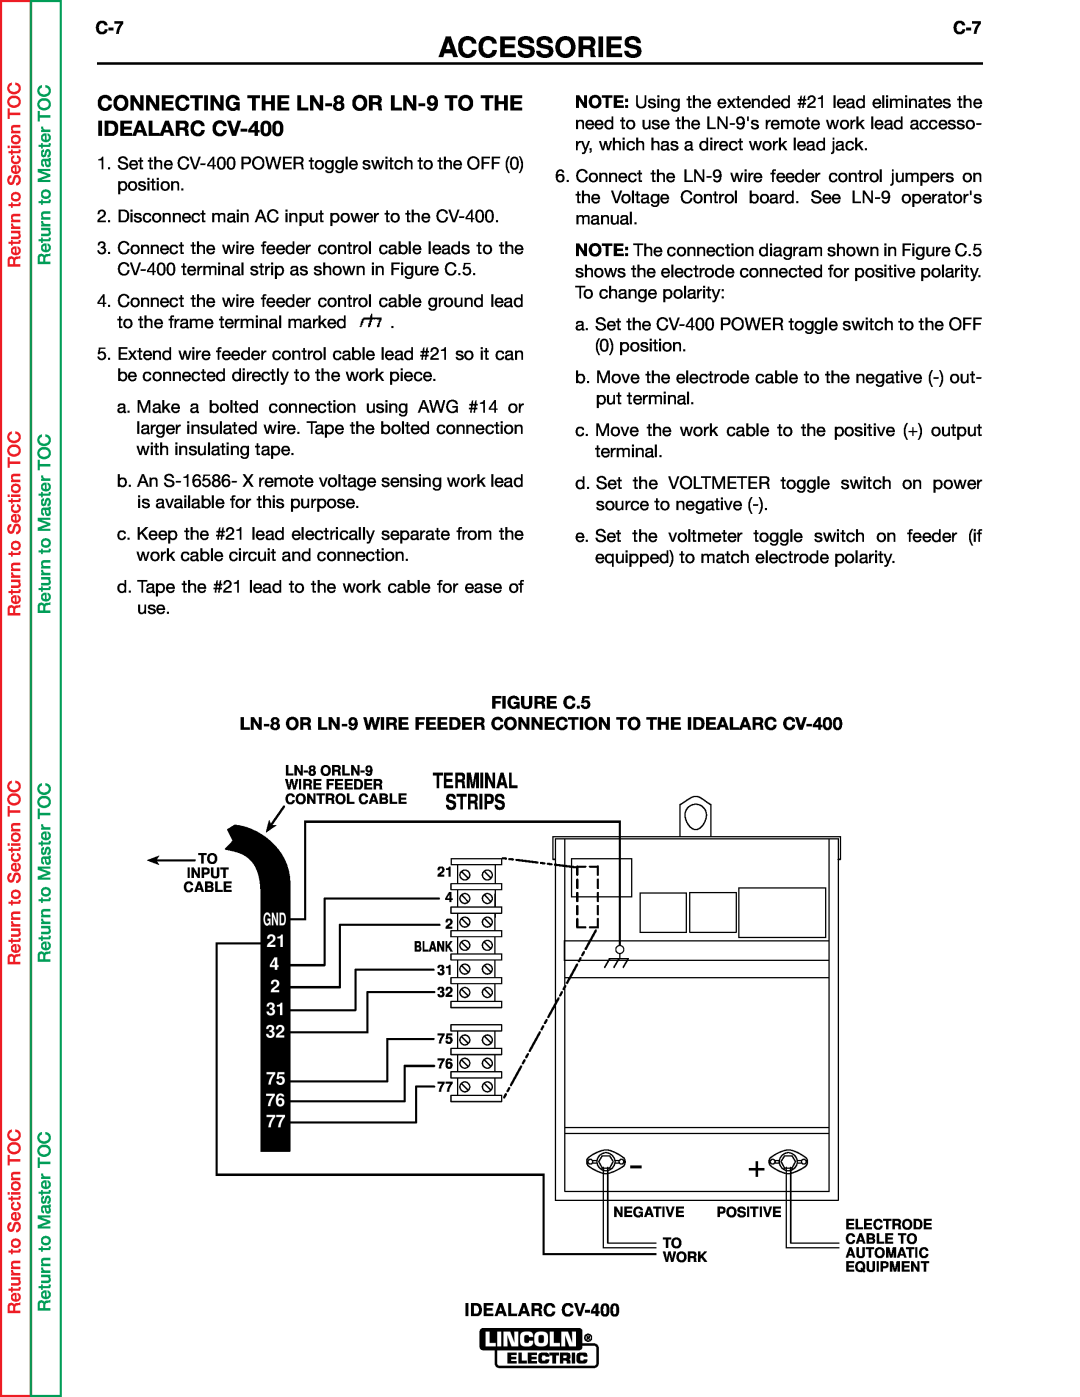 Lincoln Electric SVM136-A service manual Accessories, Return to Section TOC Return to Section TOC, Return to Master TOC 